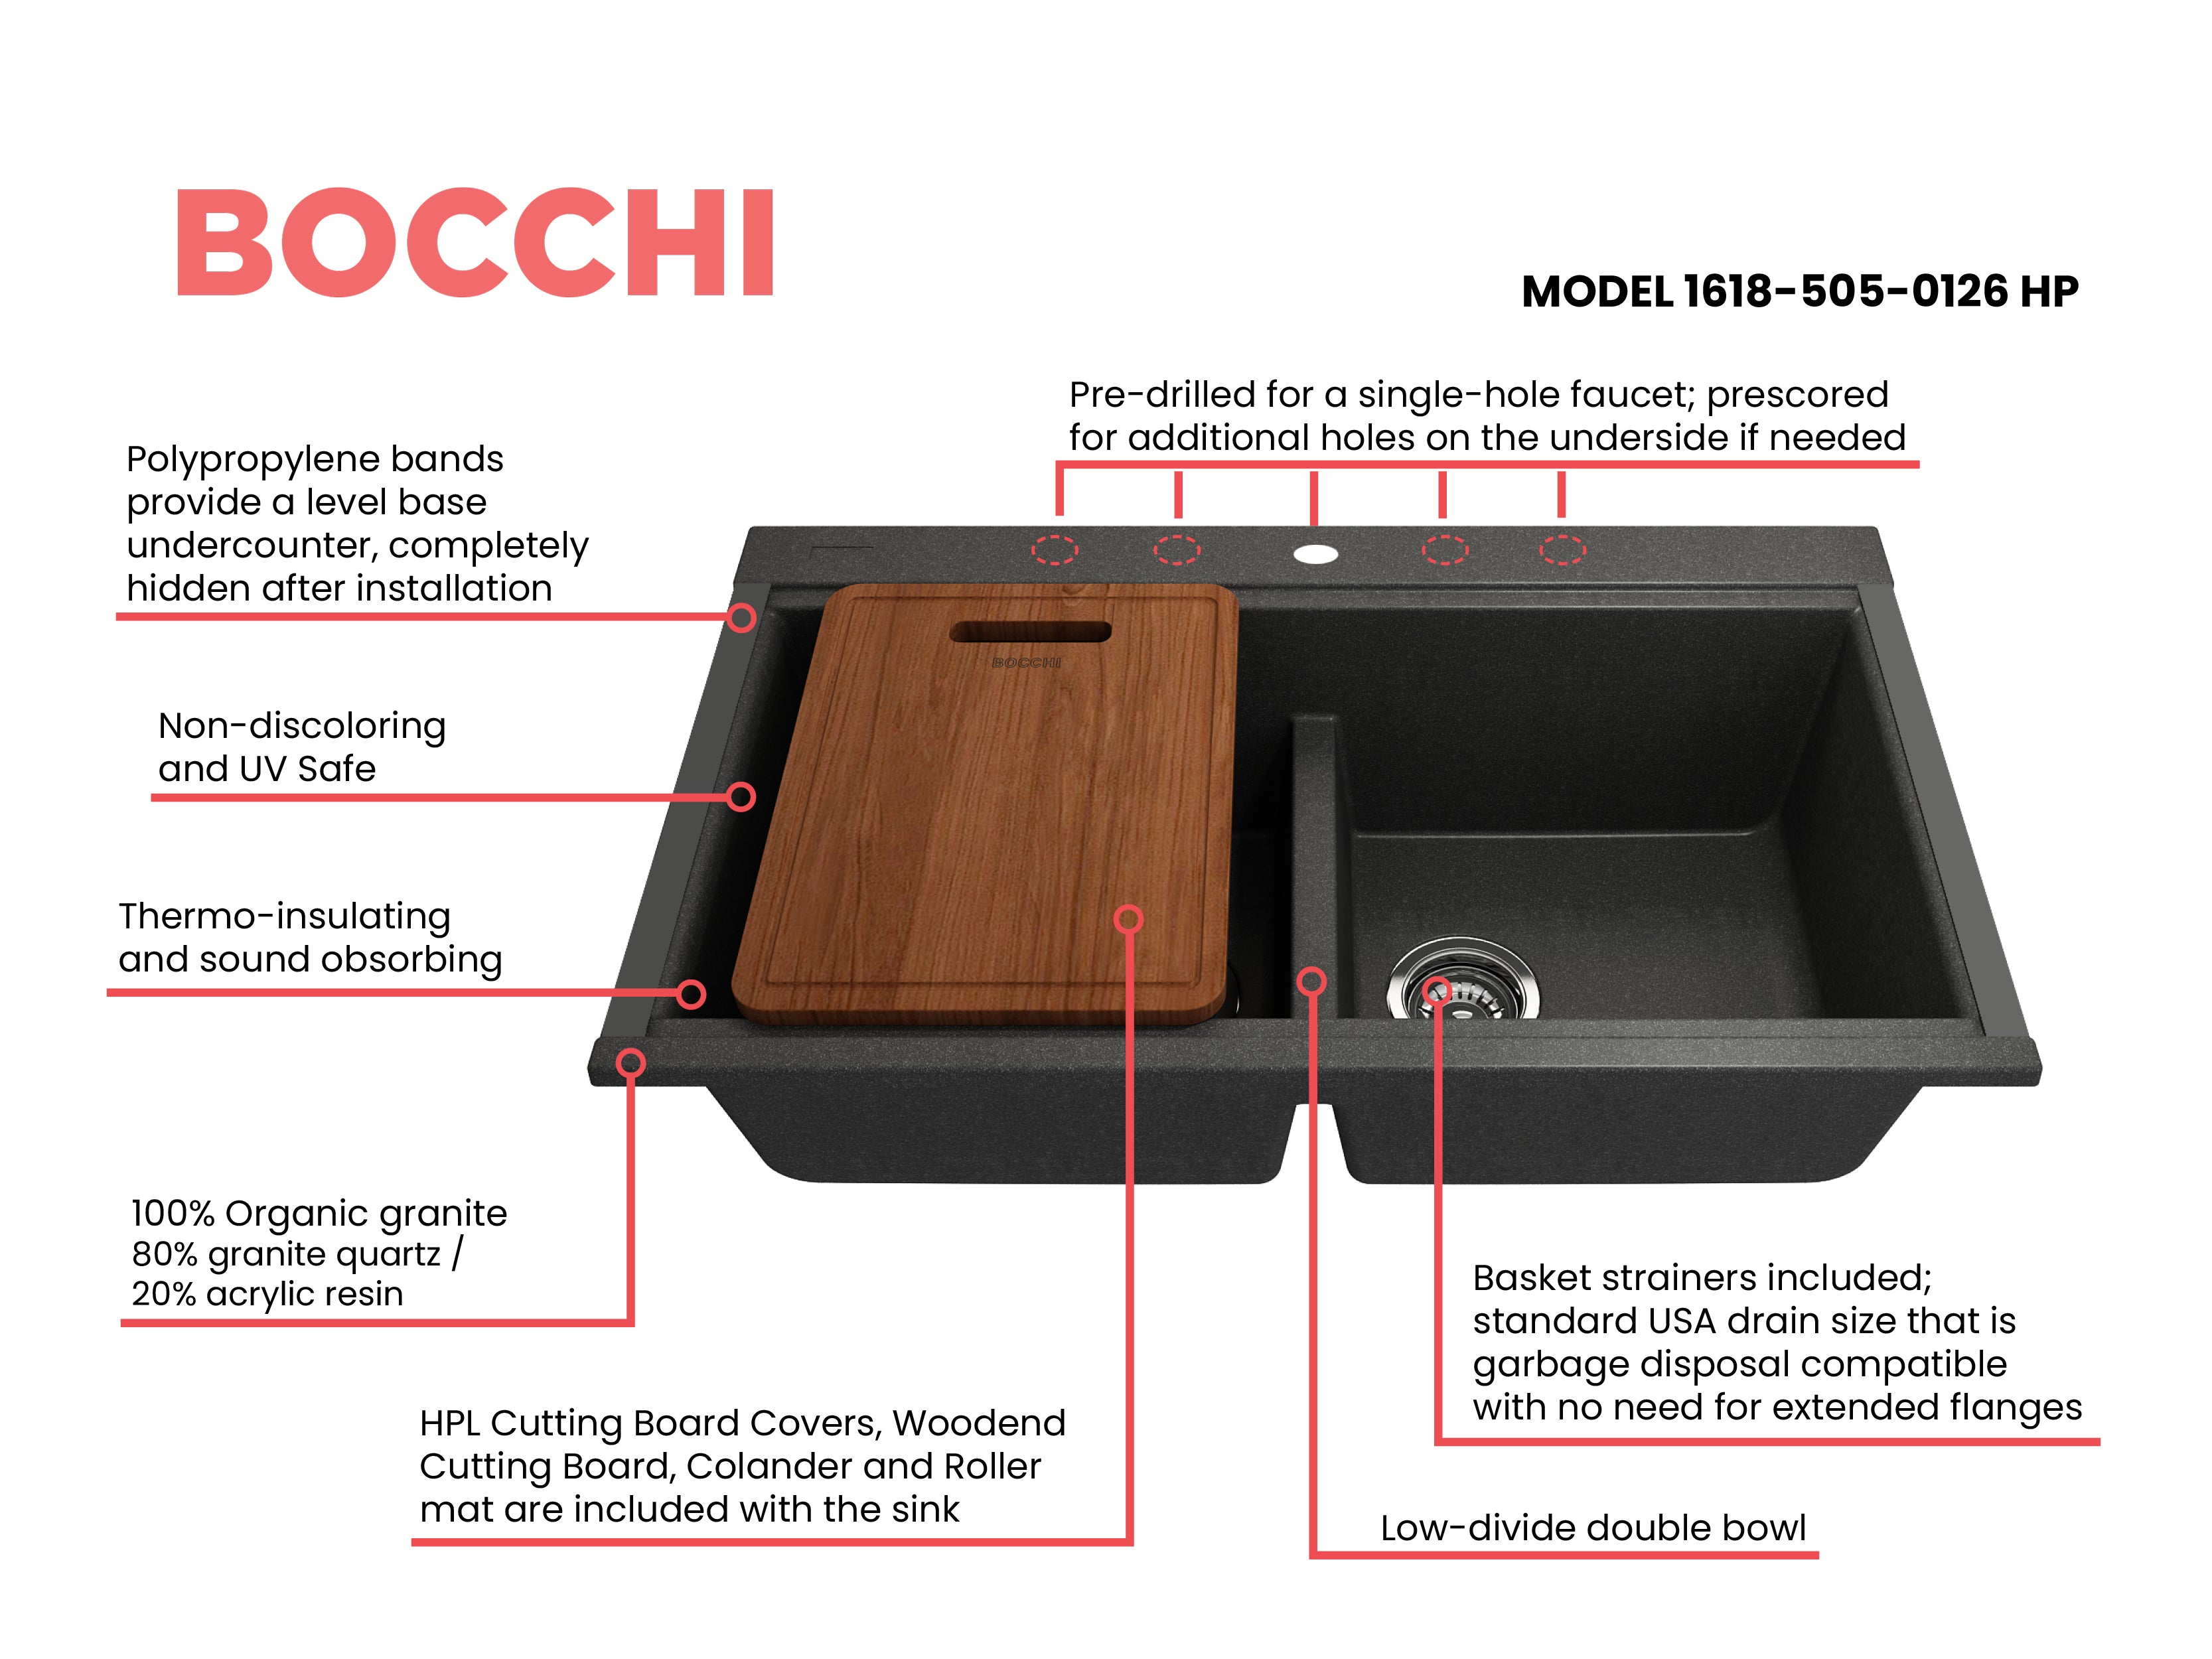 Bocchi 34" Undermount Double Bowl Composite Workstation Kitchen Sink with Covers in Metallic Black